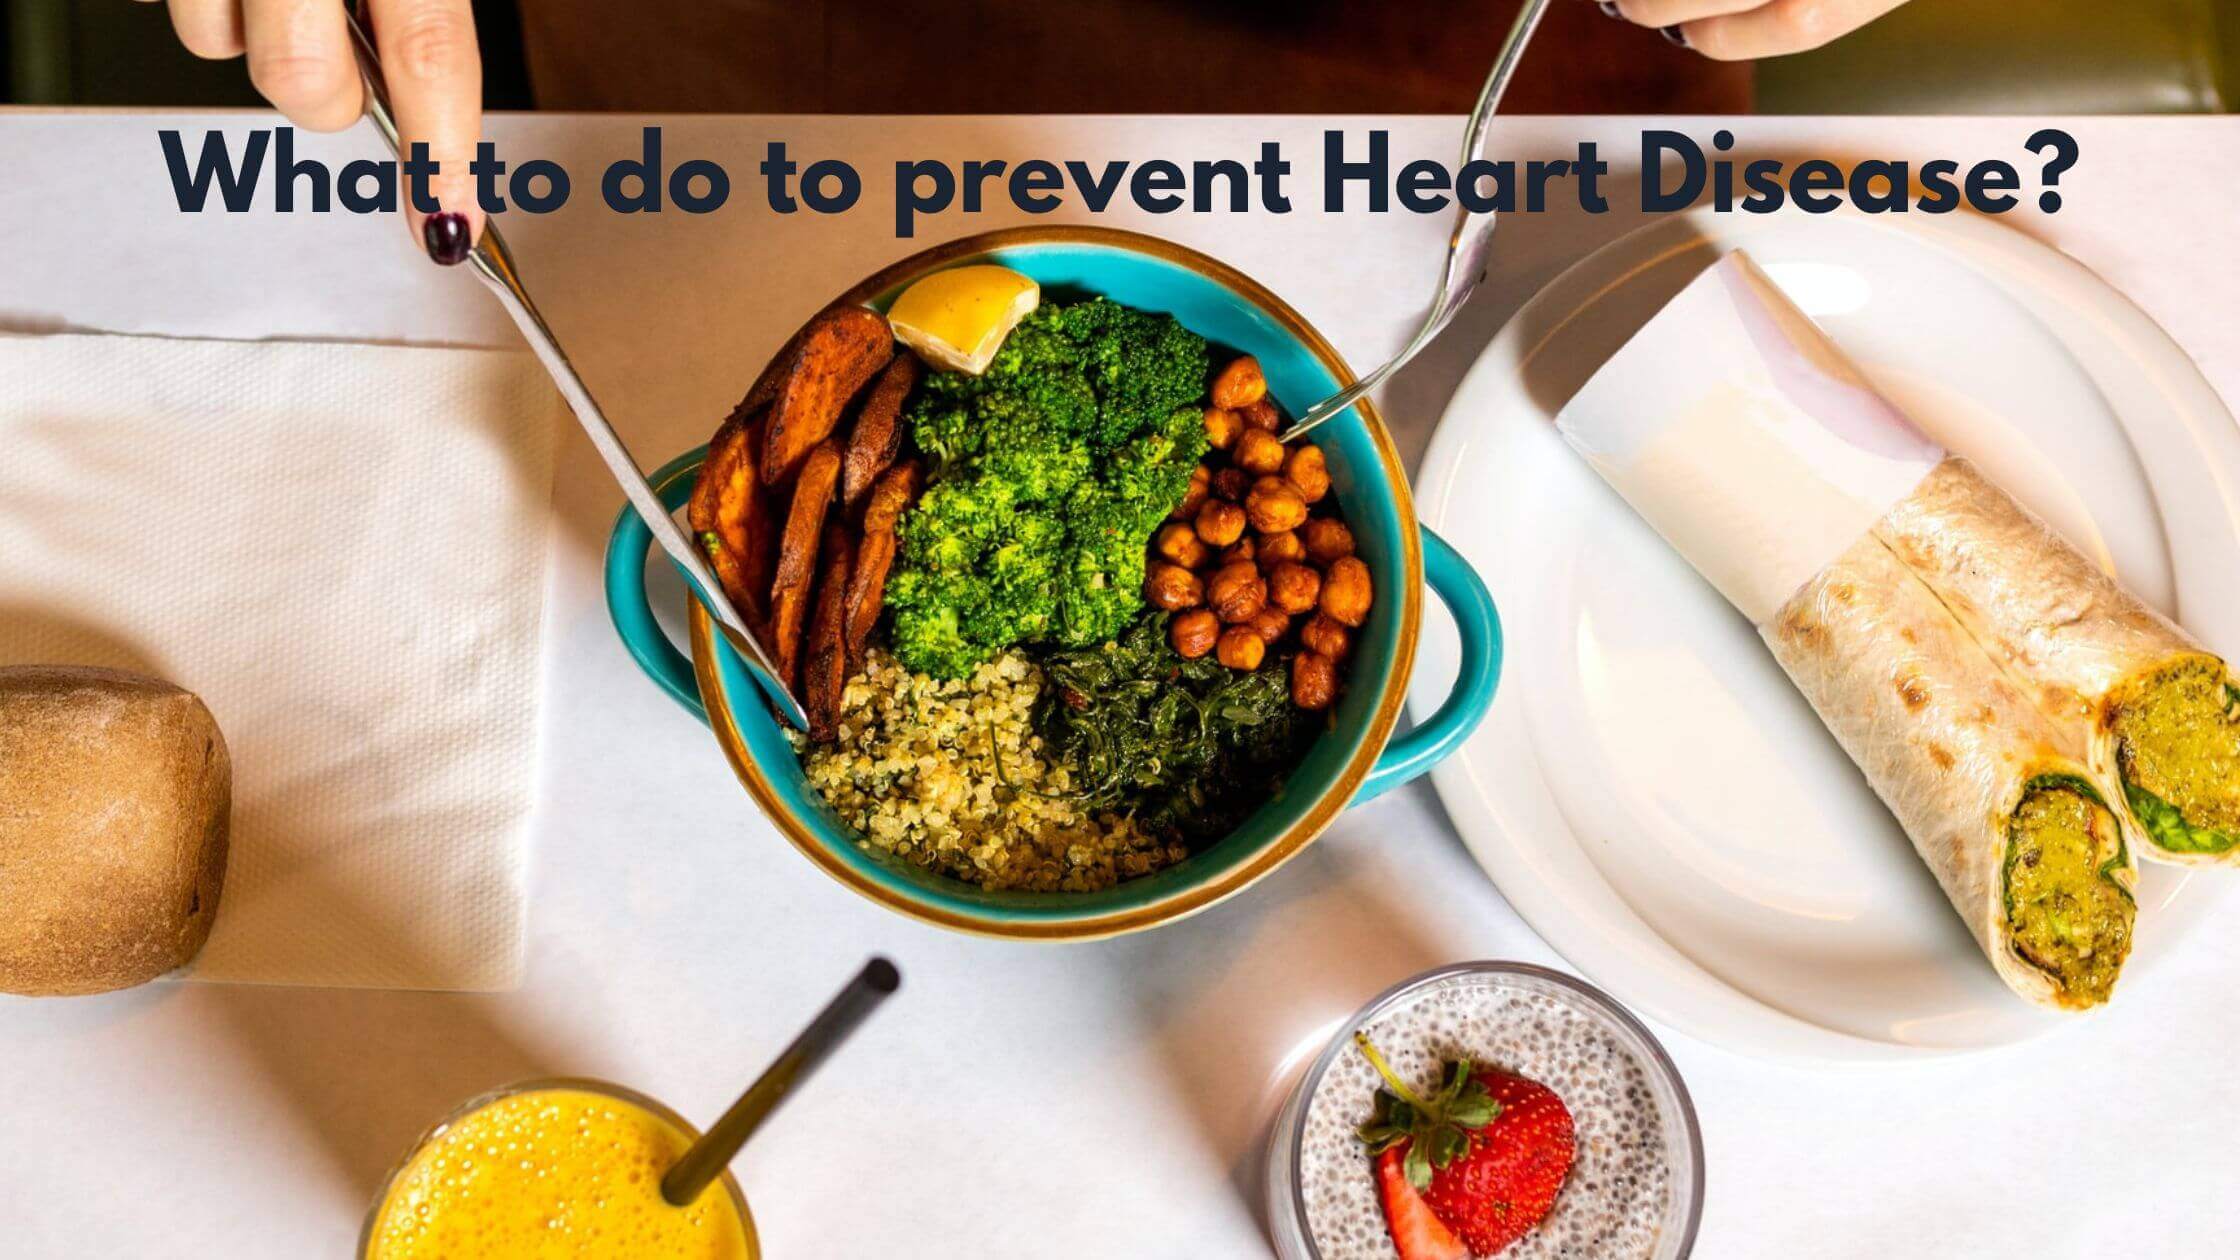 What to do to prevent Heart Disease